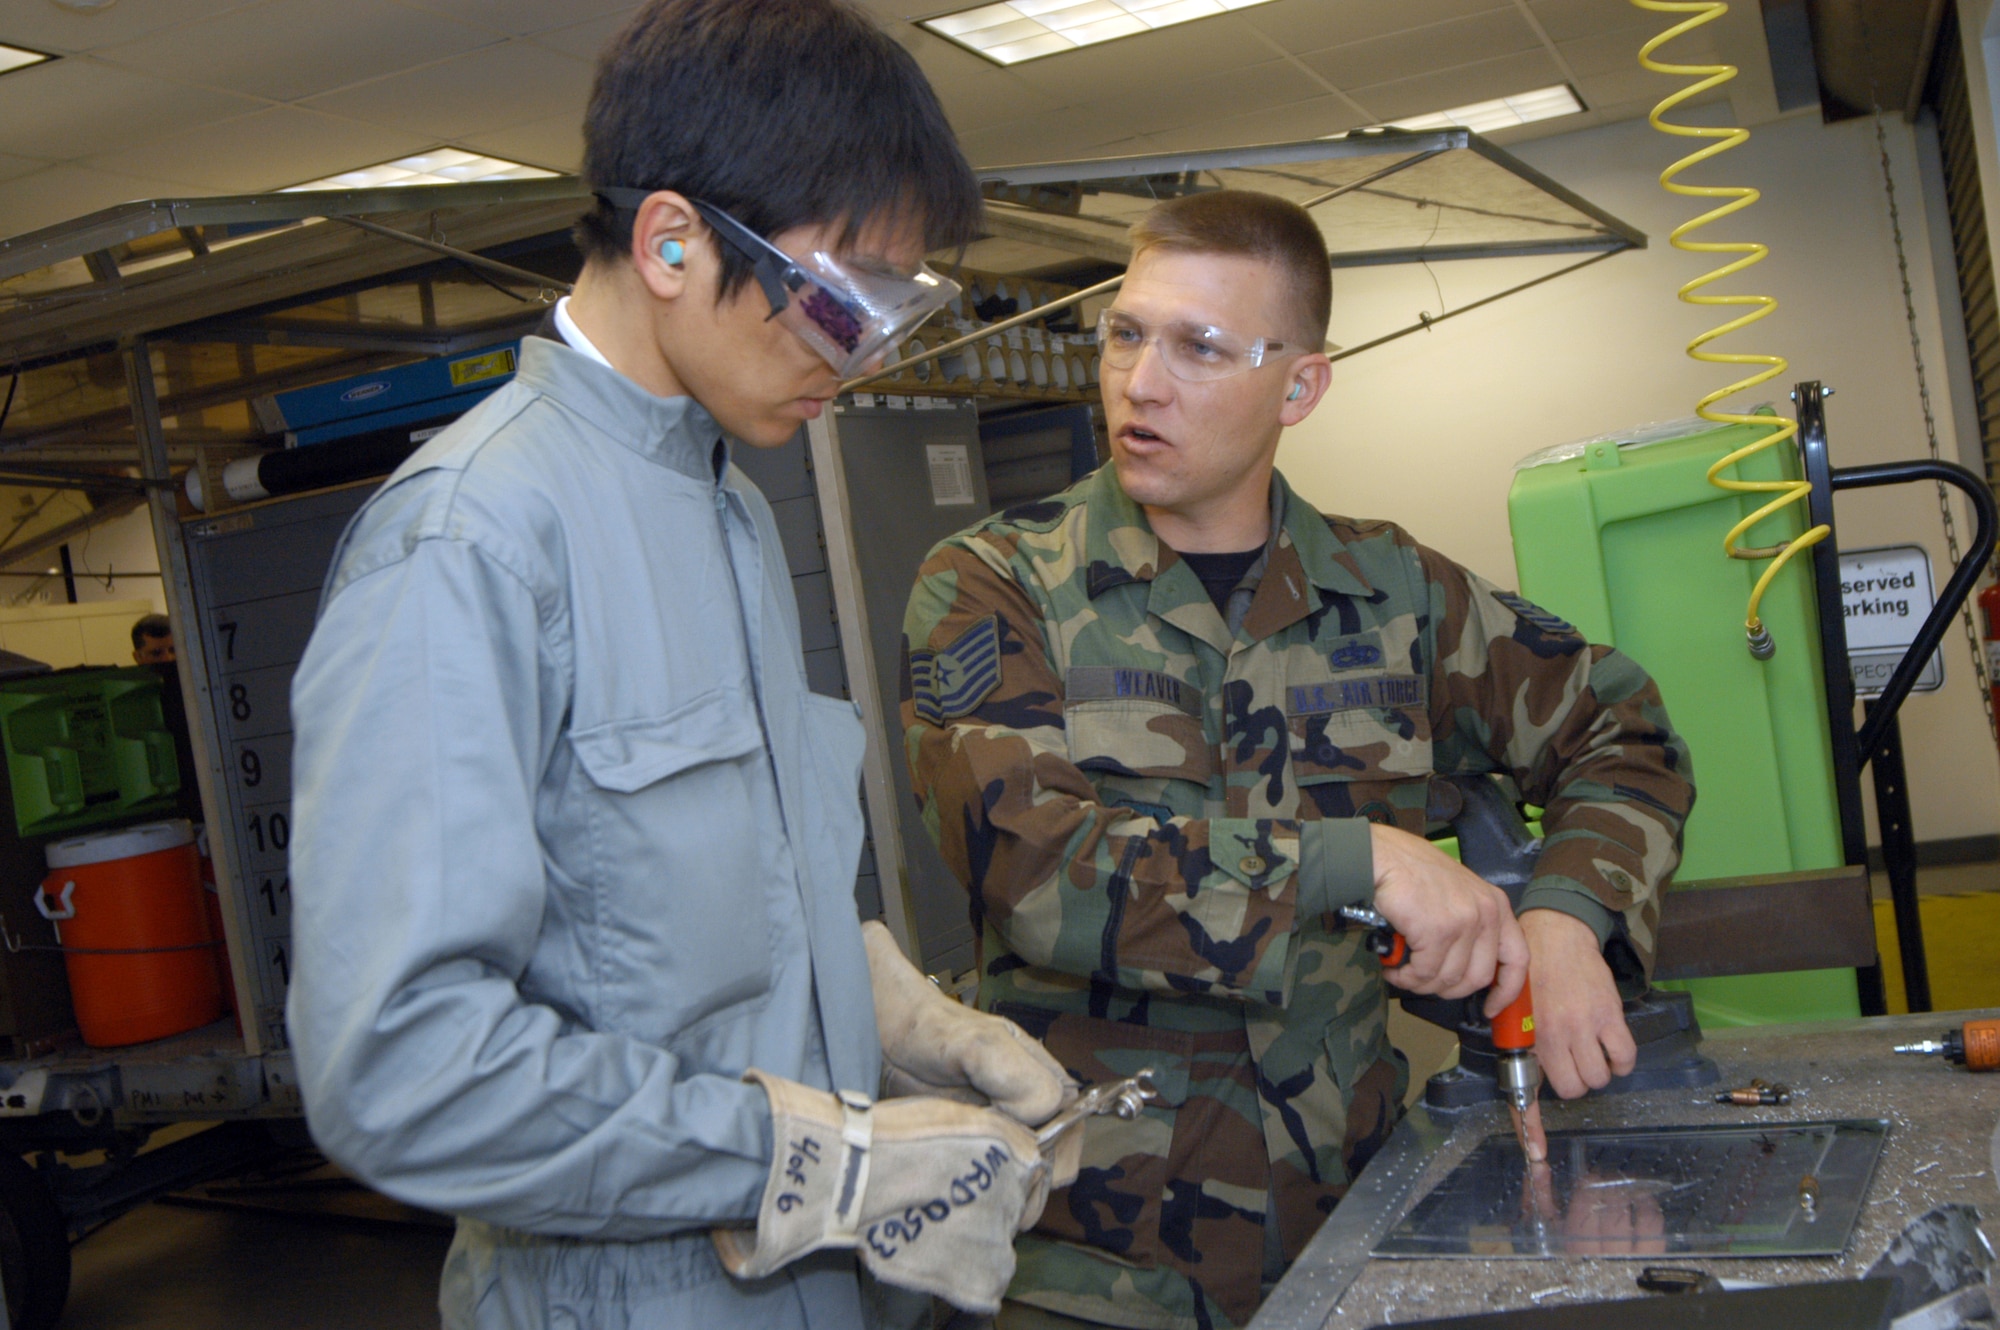 Tomohiro Matsuo, the civilian member among the students, gets instruction from Tech. Sgt. Glen Weaver, 653rd Aircraft Battle Damage Repair training instructor.